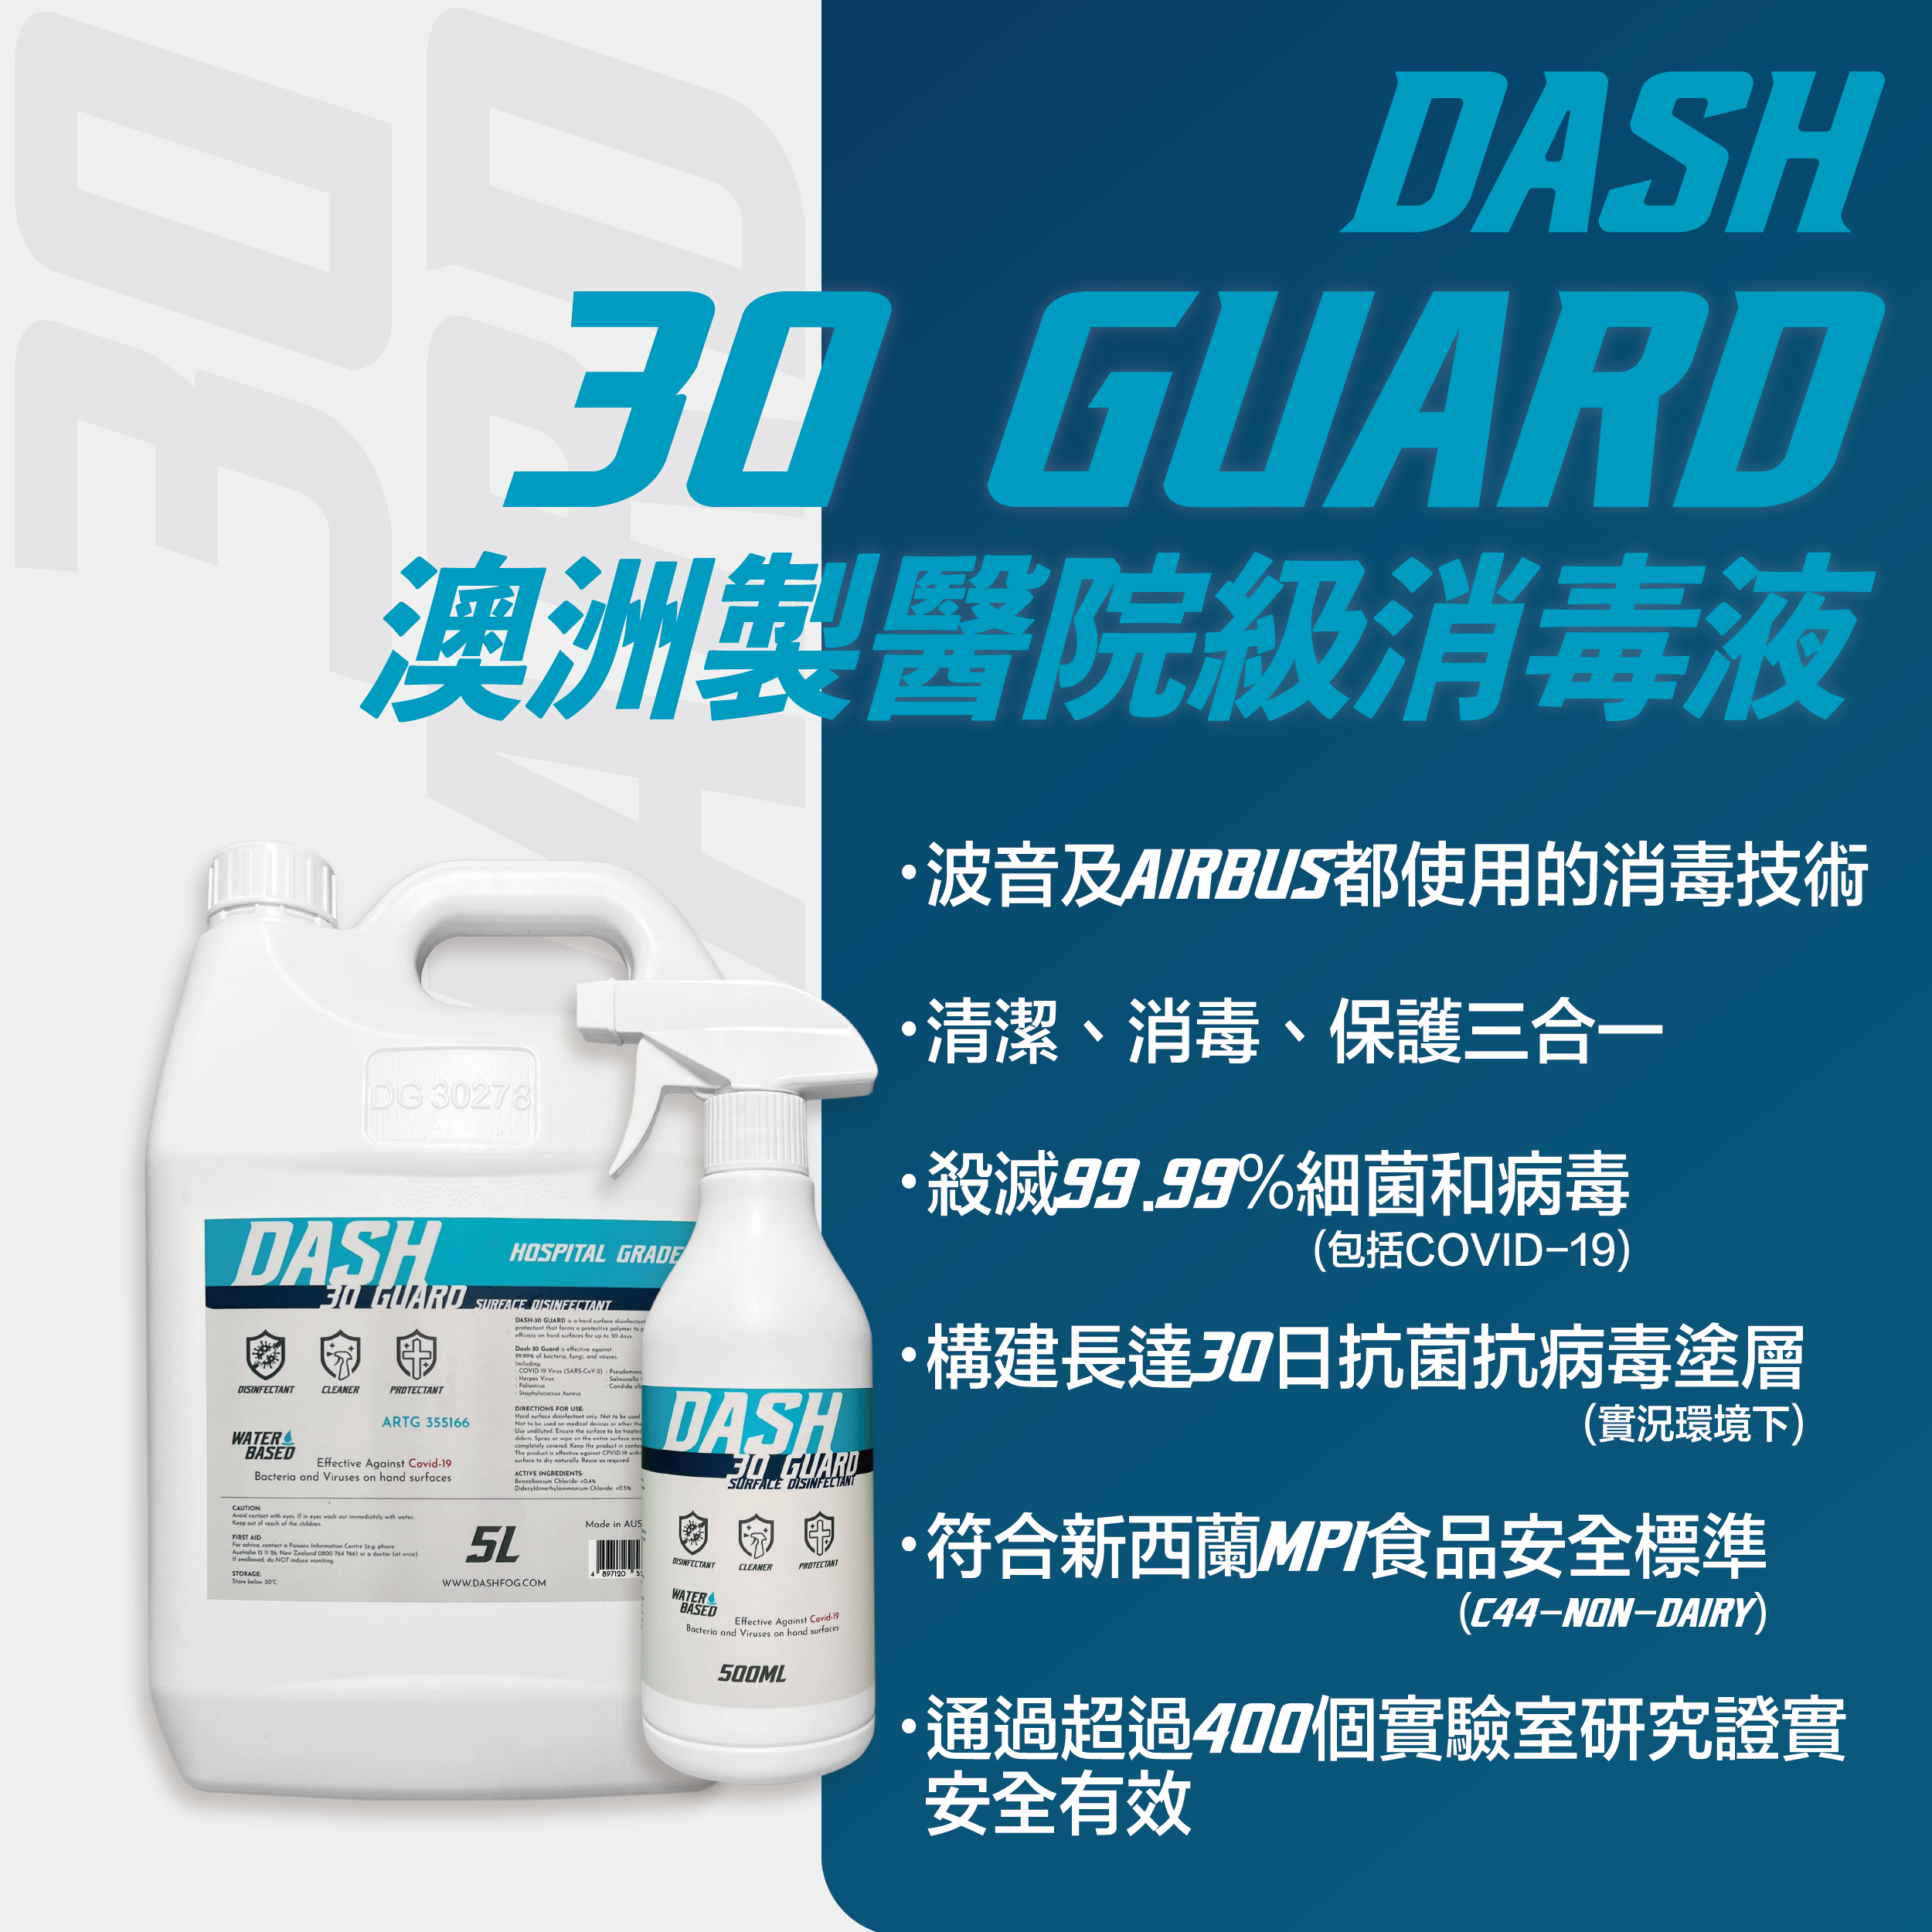 DASH-30 Guard [Selected by Boeing and Airbus] Hospital Grade Antibacterial Disinfectant Coating Disinfectant (500ml)